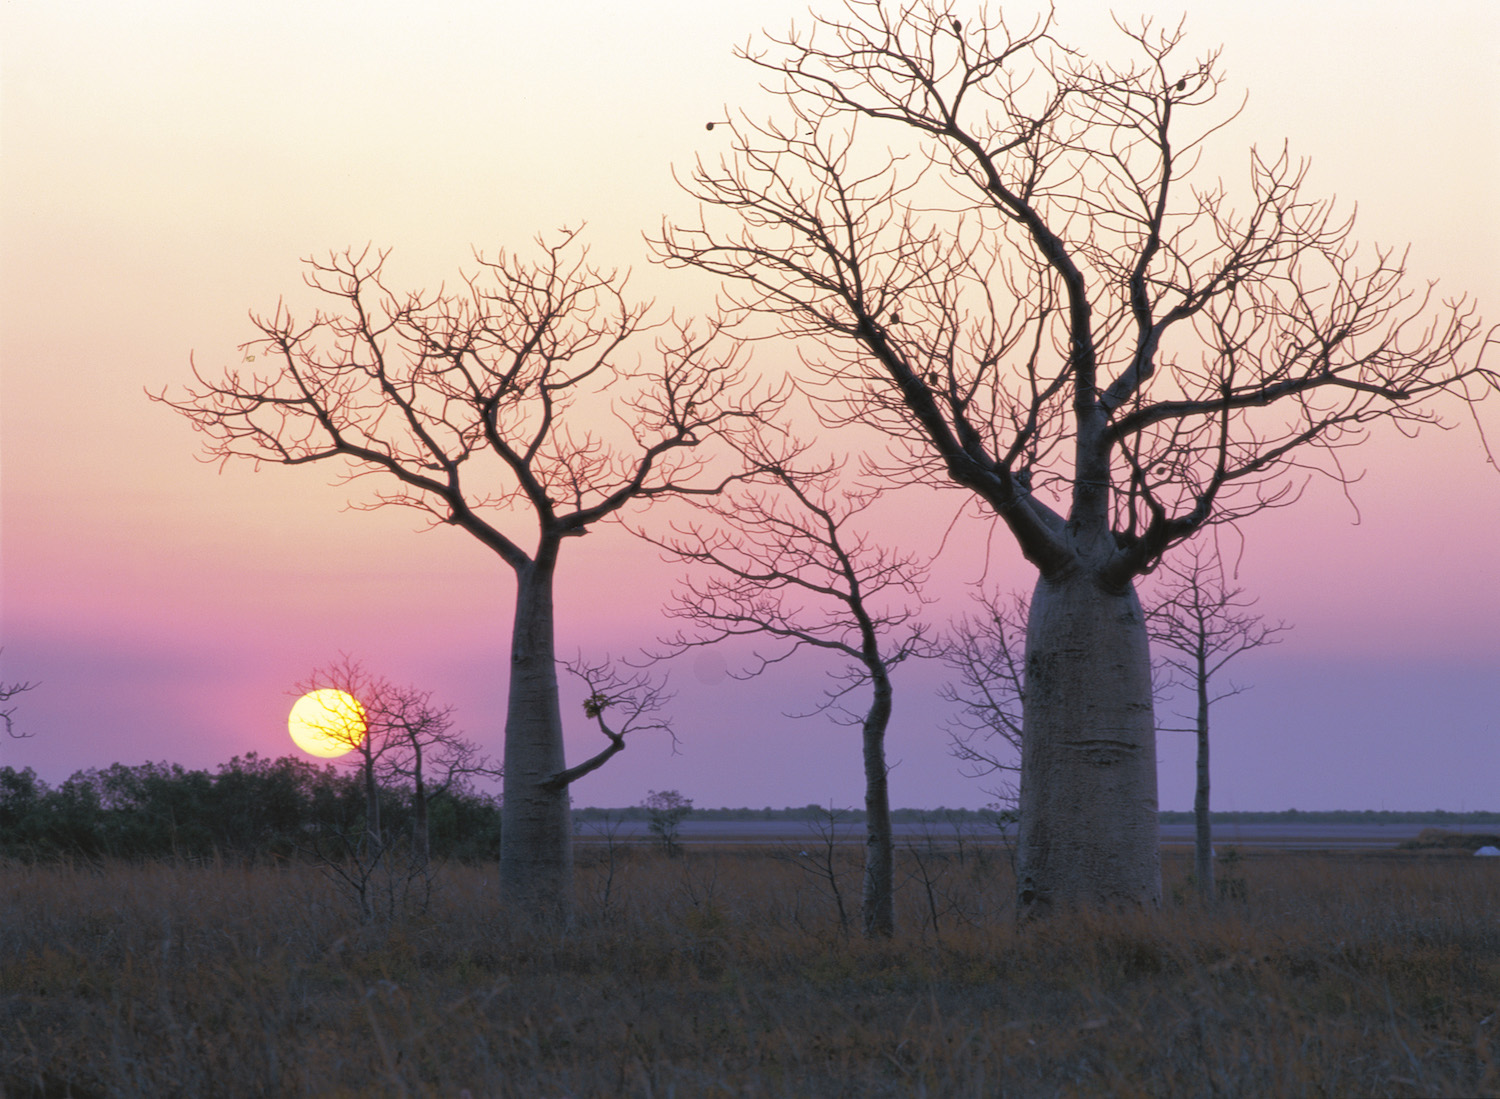 One of the unique and exclusive Australian experiences is watching the sunset over the Baobabs in the Kimberley